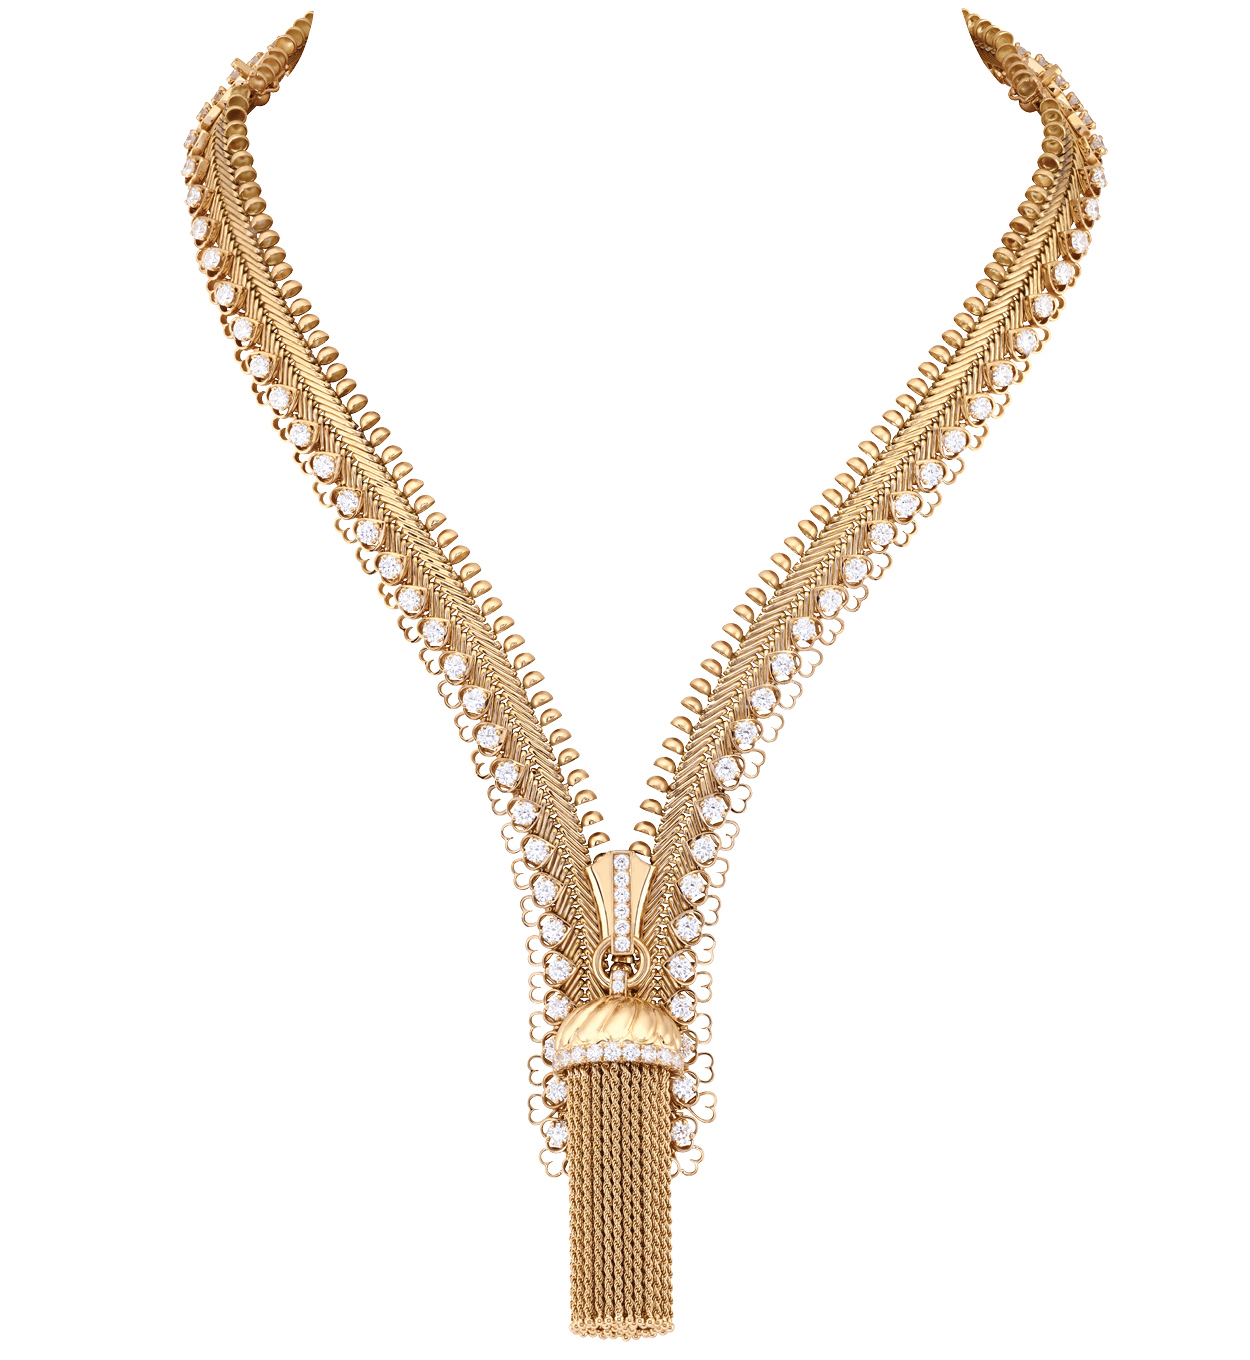 AN ICONIC RETRO GOLD, RUBY AND DIAMOND 'ZIP' NECKLACE, VAN CLEEF & ARPELS